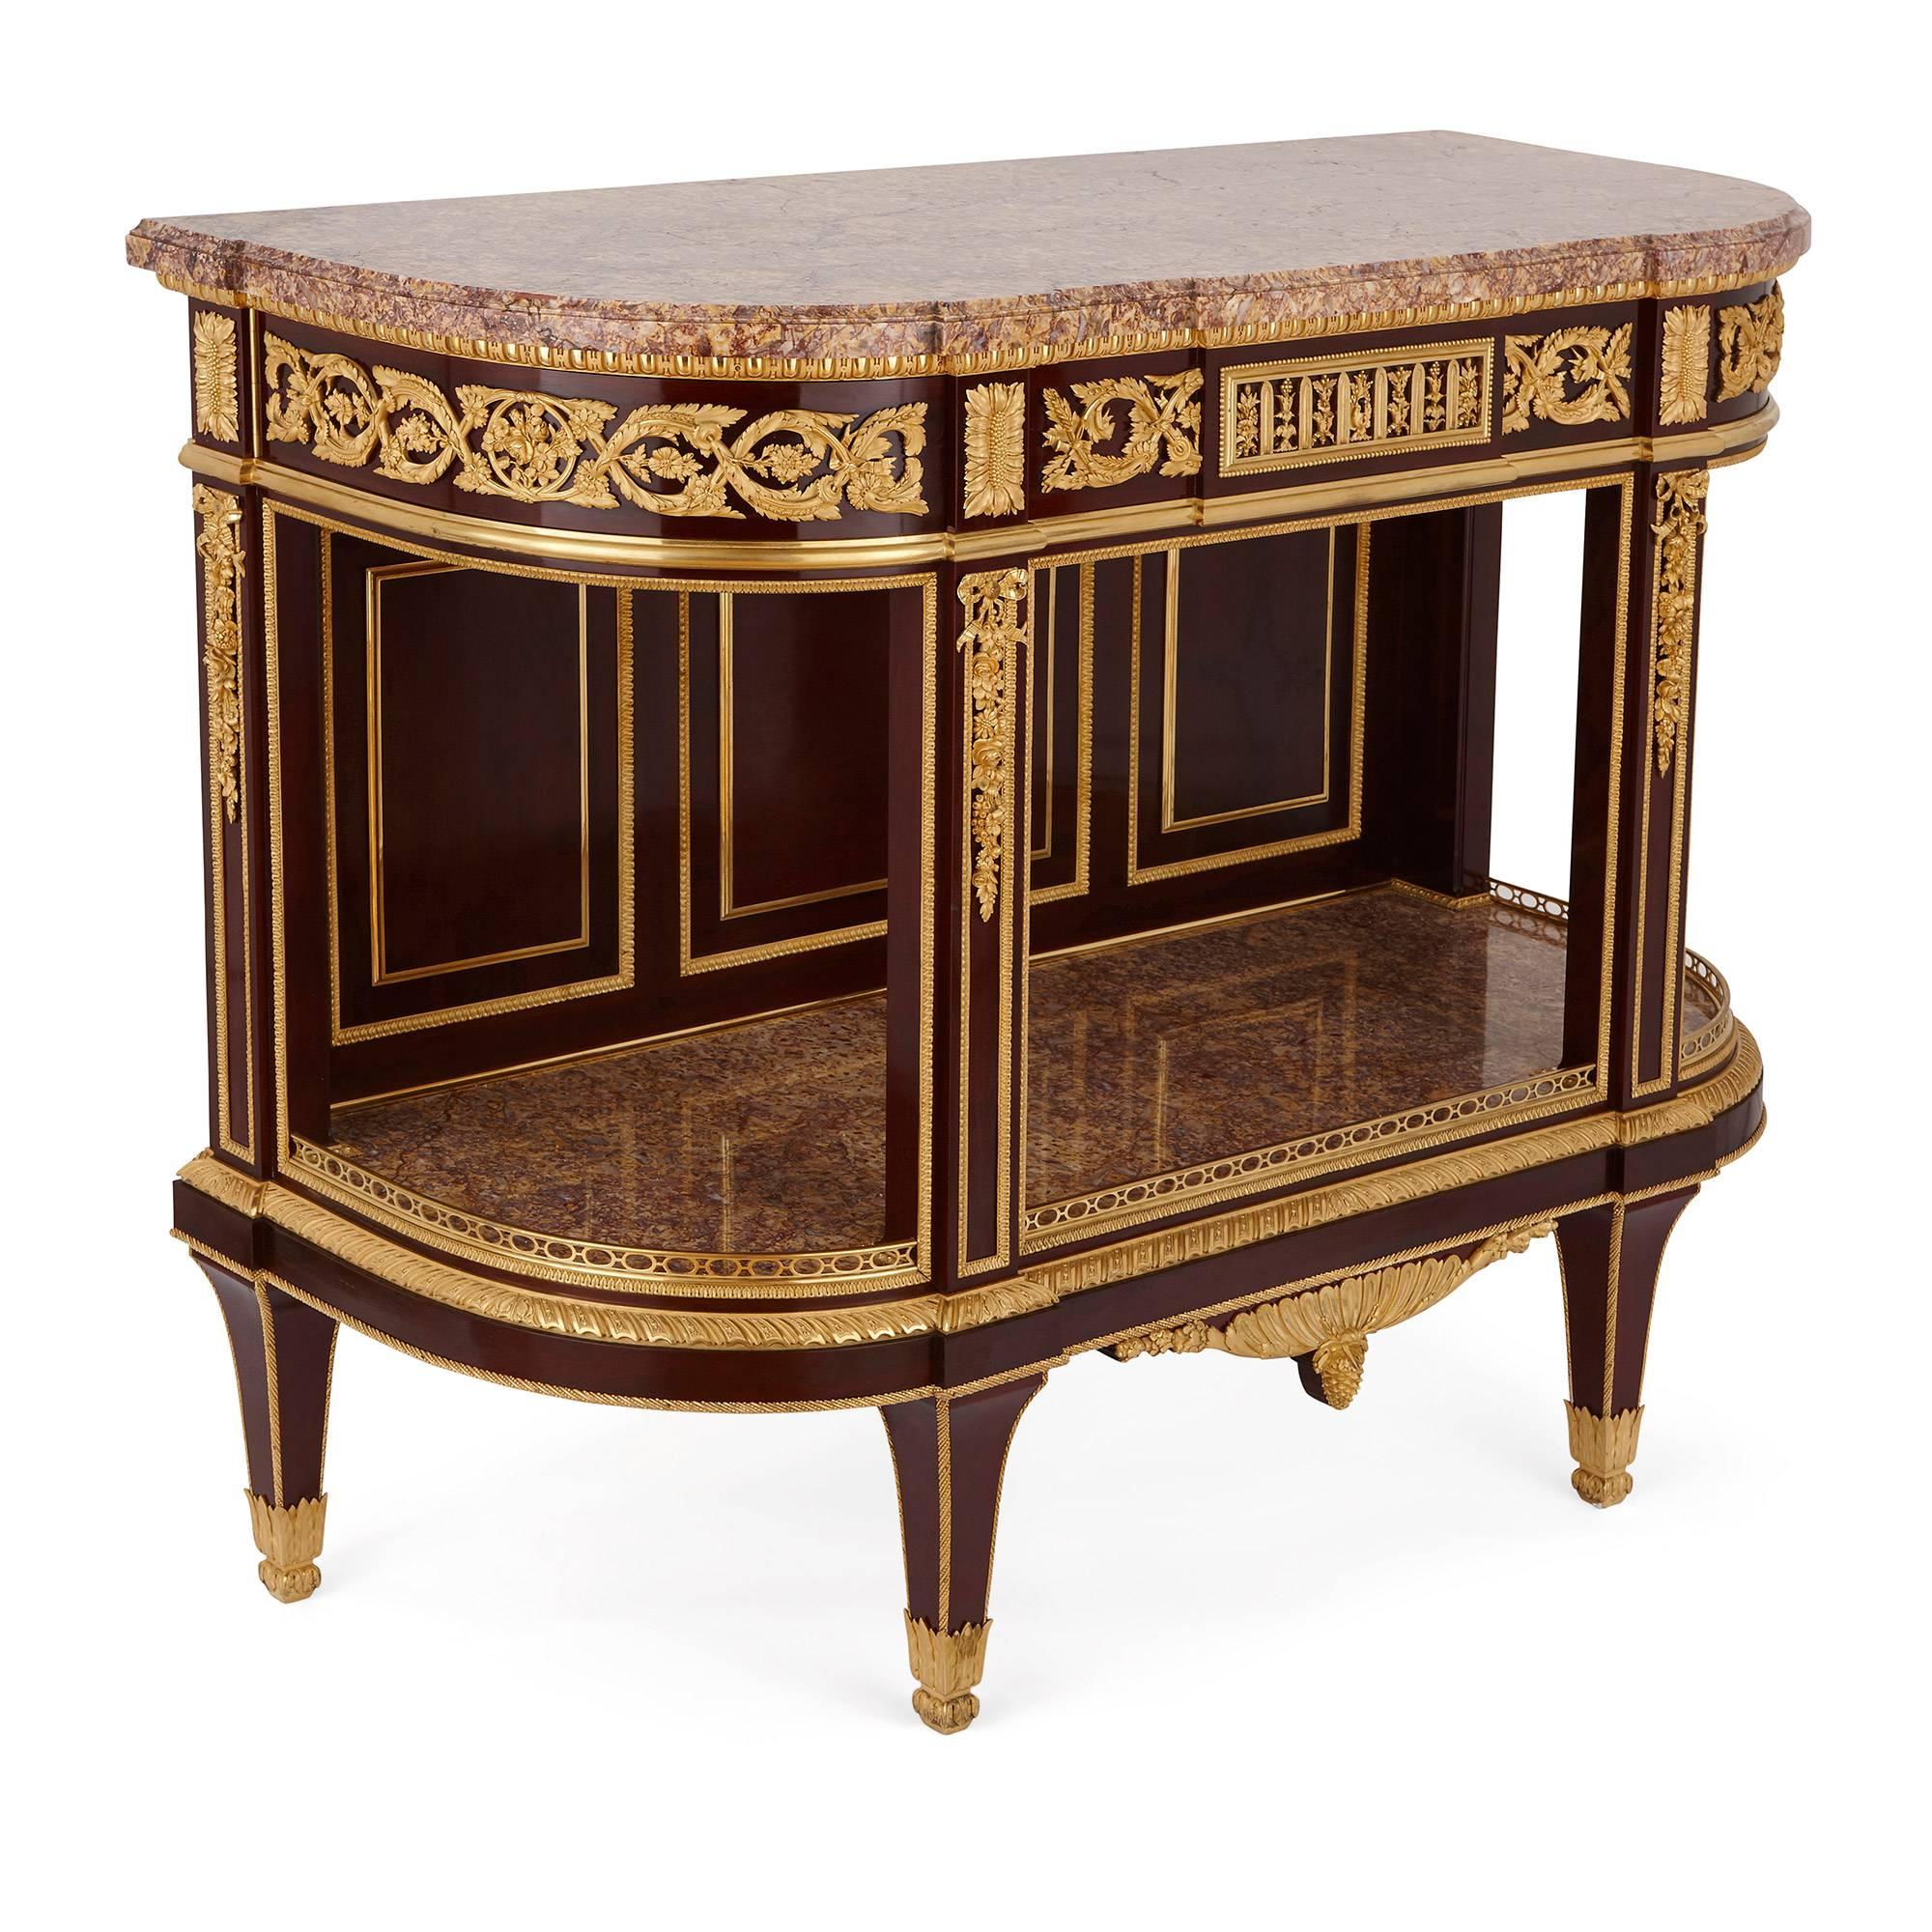 The dessert console with ormolu mounts and parcel-gilt spade legs, with a veined marble top, the frieze below decorated with foliate and garland motifs, with a central drawer, stamped and dated on the back 'Henry Dasson / 1886'.